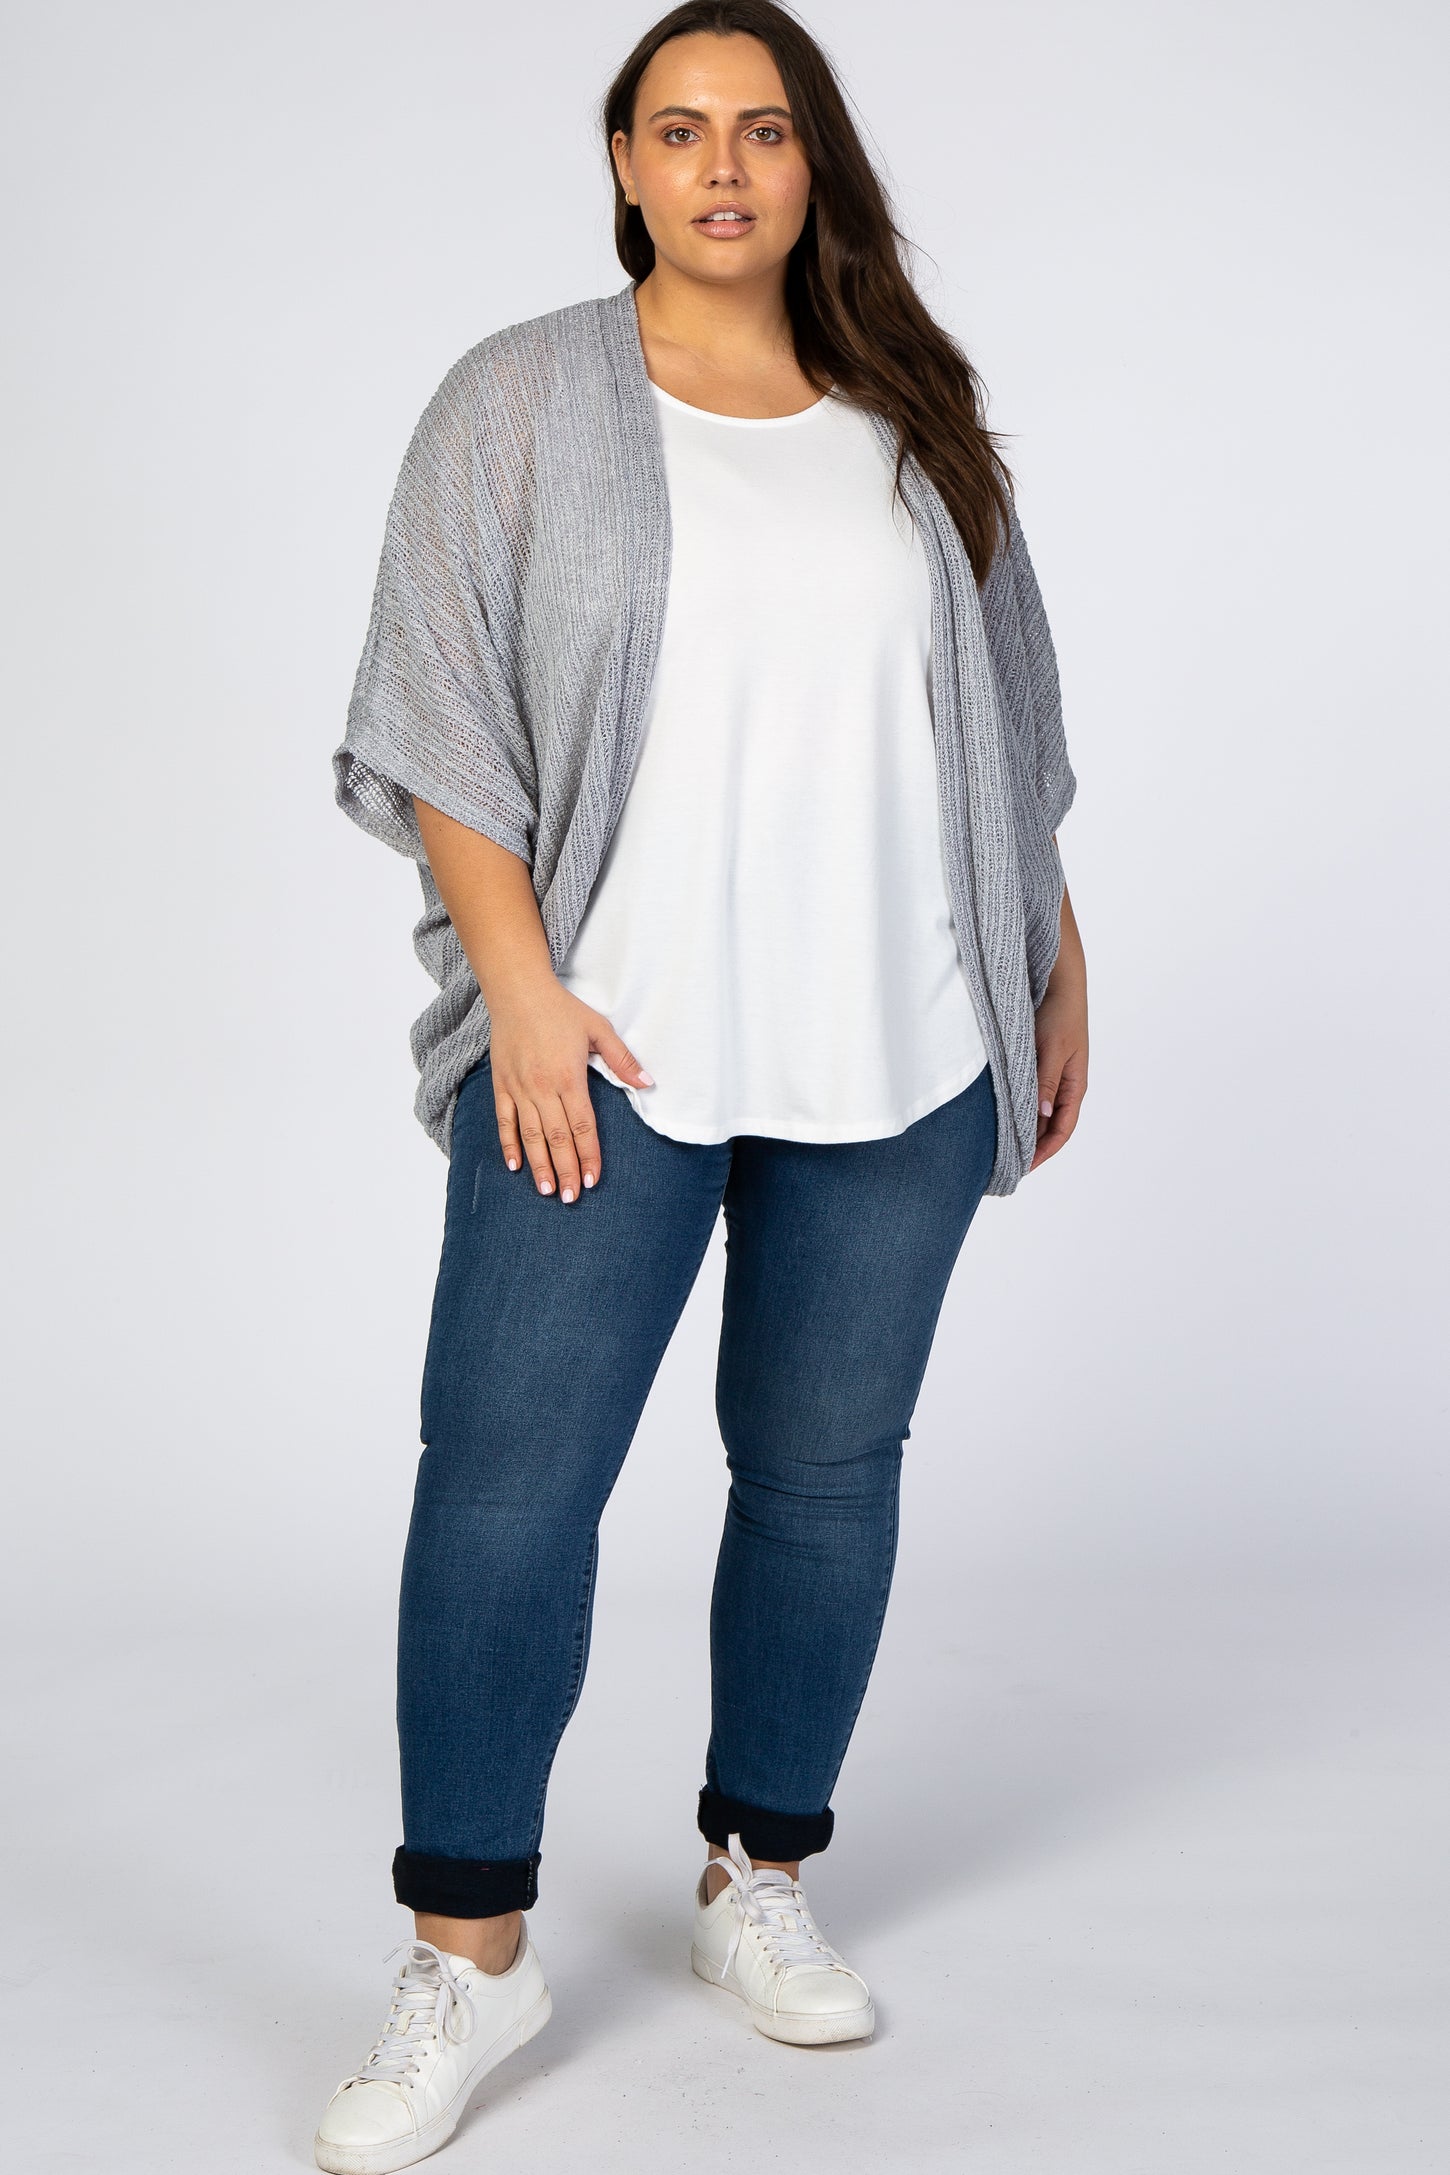 Grey Woven Knit Dolman Plus Cover Up